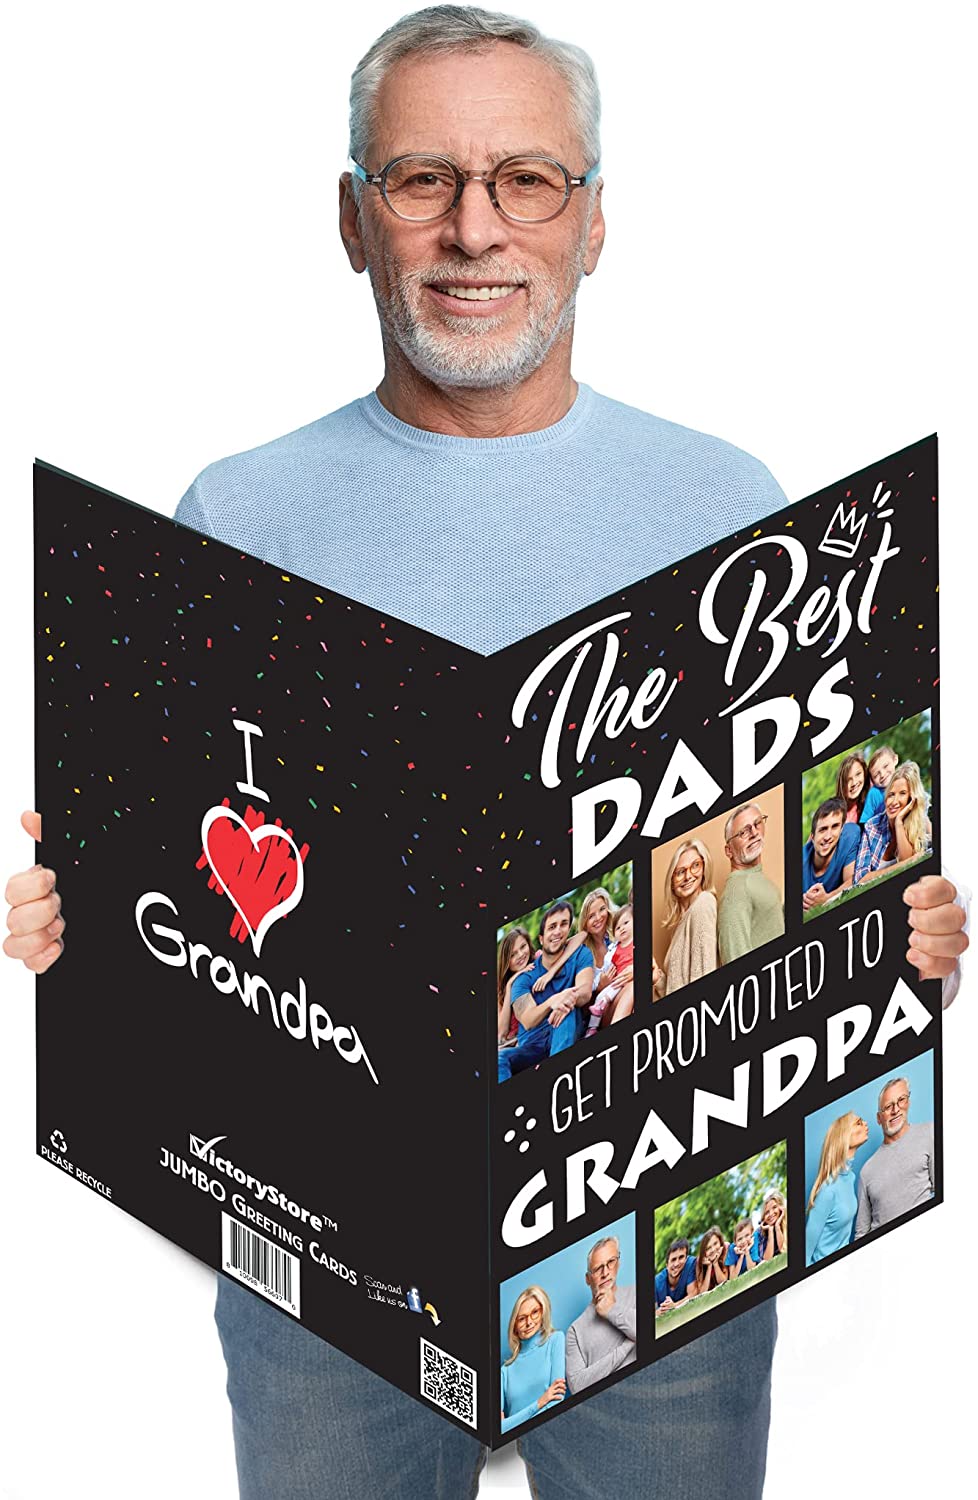 3' The Best Dads Get Promoted To Grandpa Father's Day Card